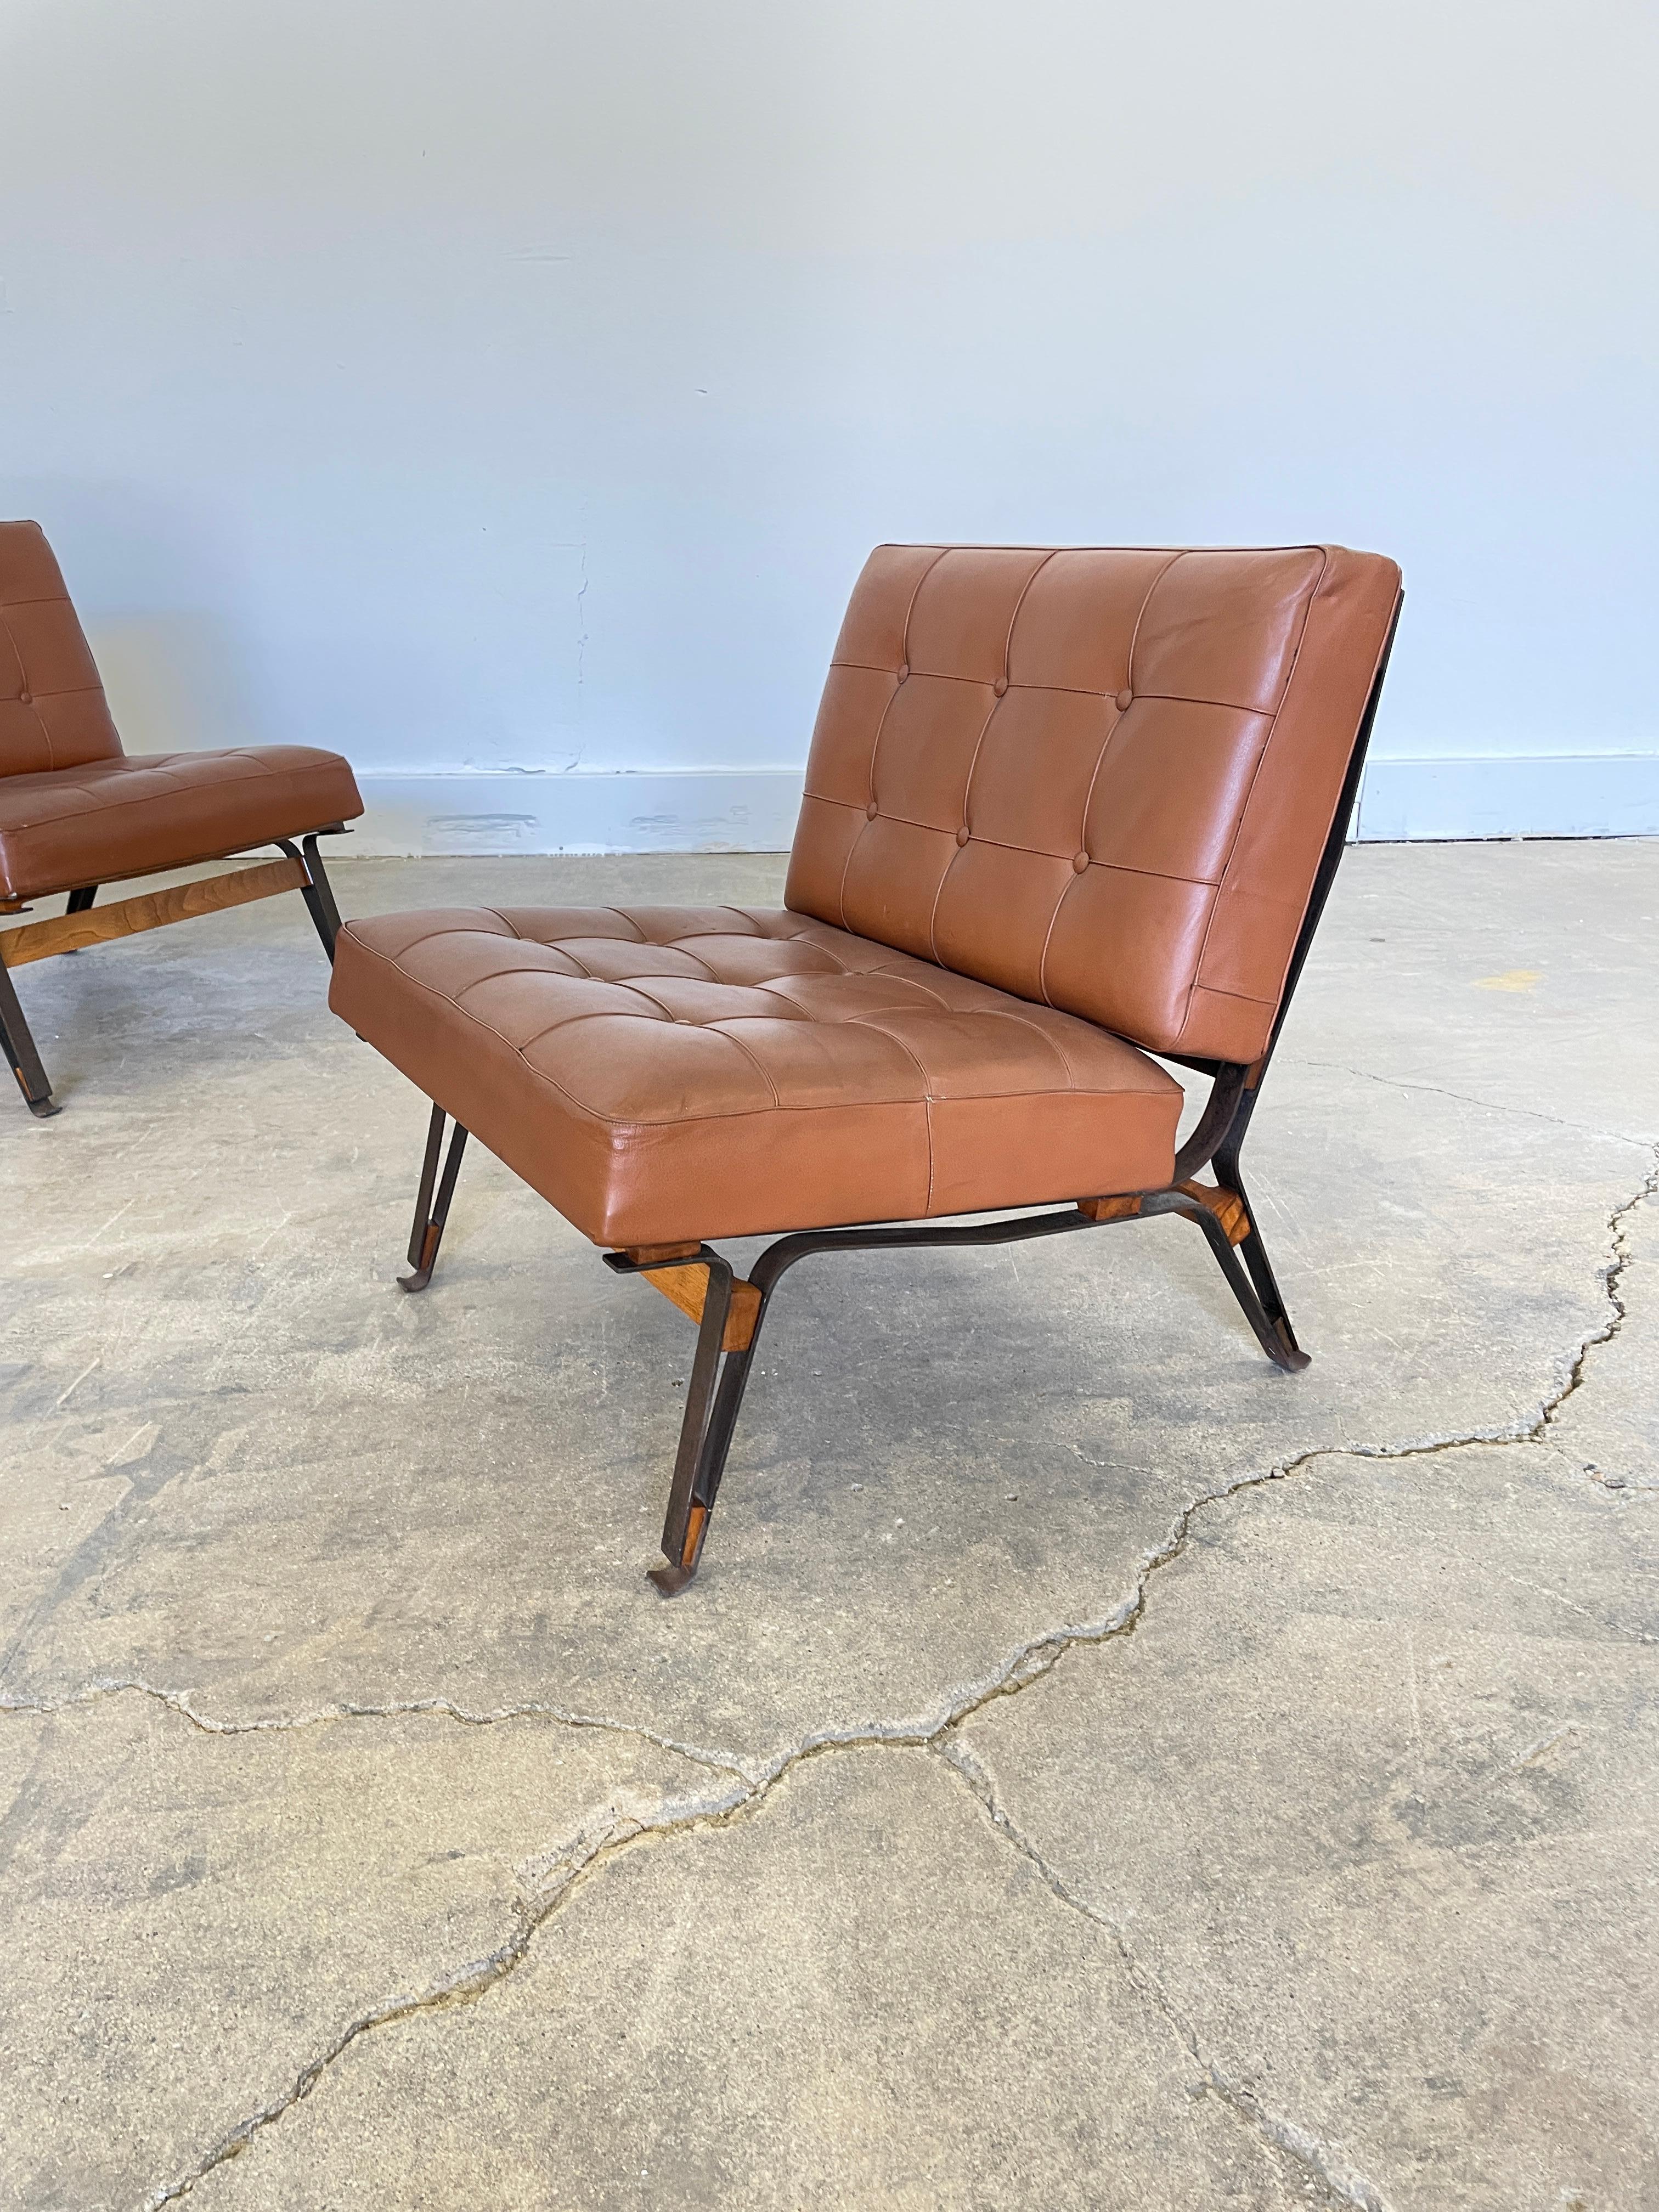 Steel Model 856 Rare Pair of Matched Leather Lounge Chairs by Ico Parisi, 1950s For Sale